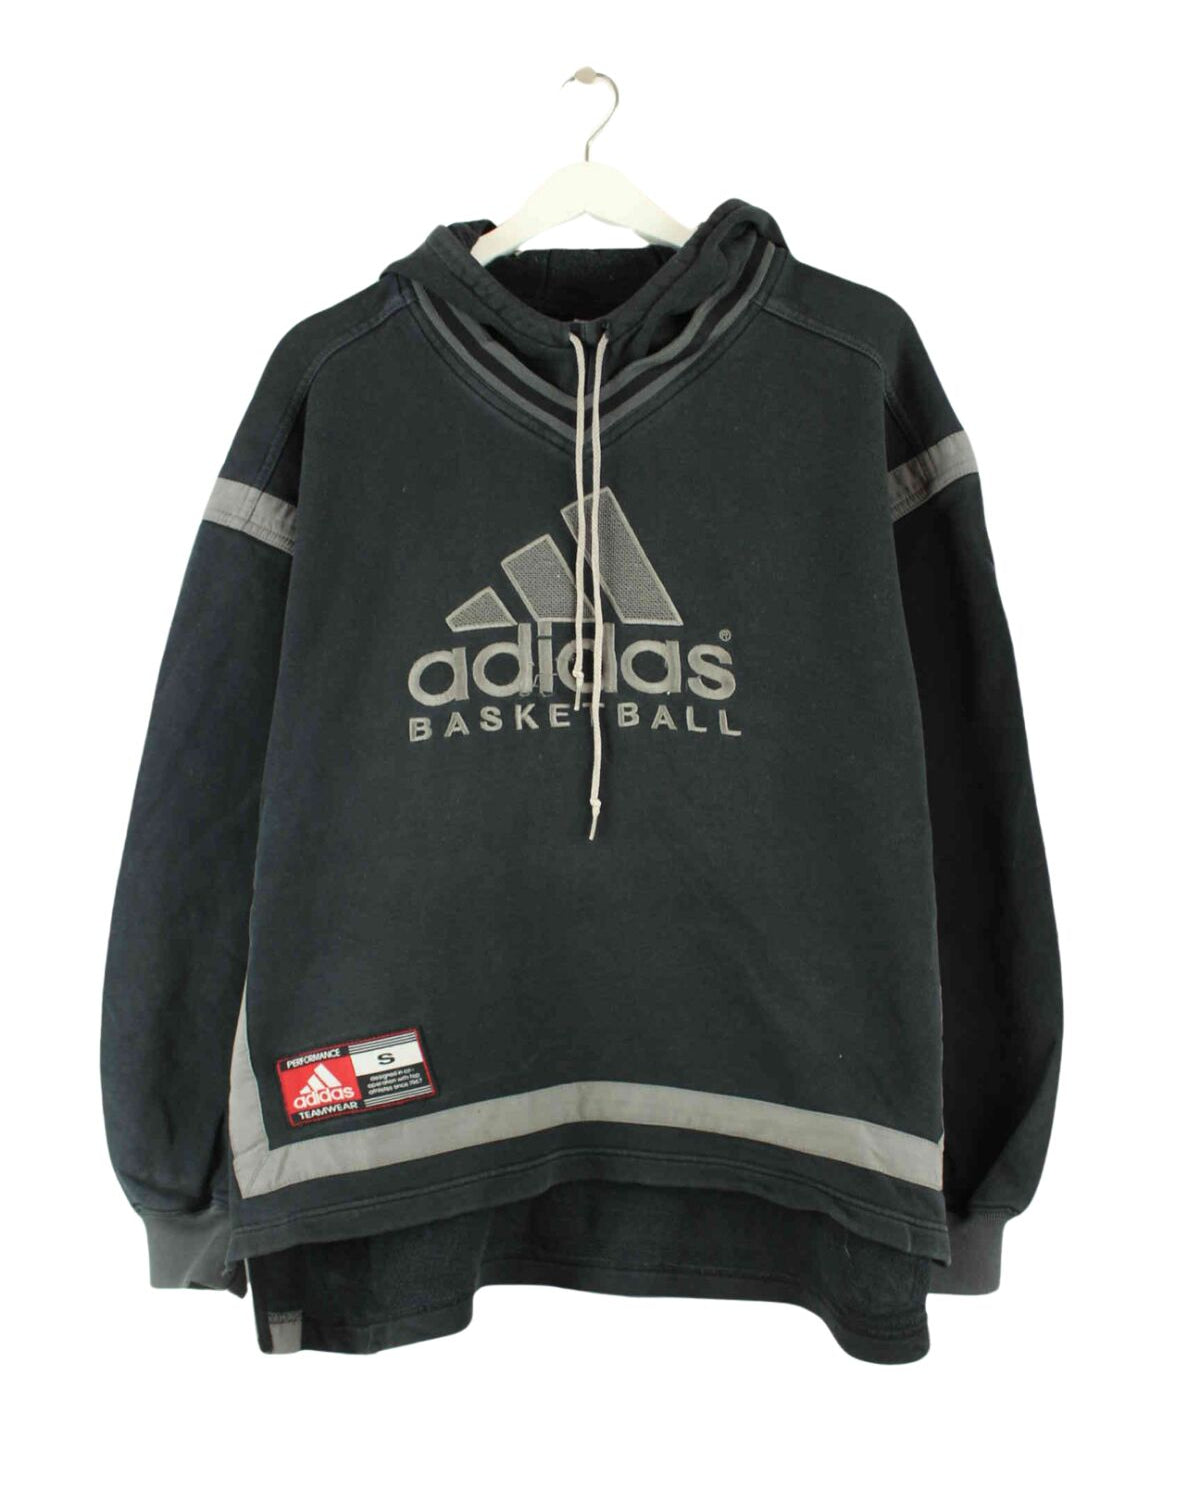 Adidas 90s Vintage Basketball Embroidered Hoodie Schwarz S (front image)